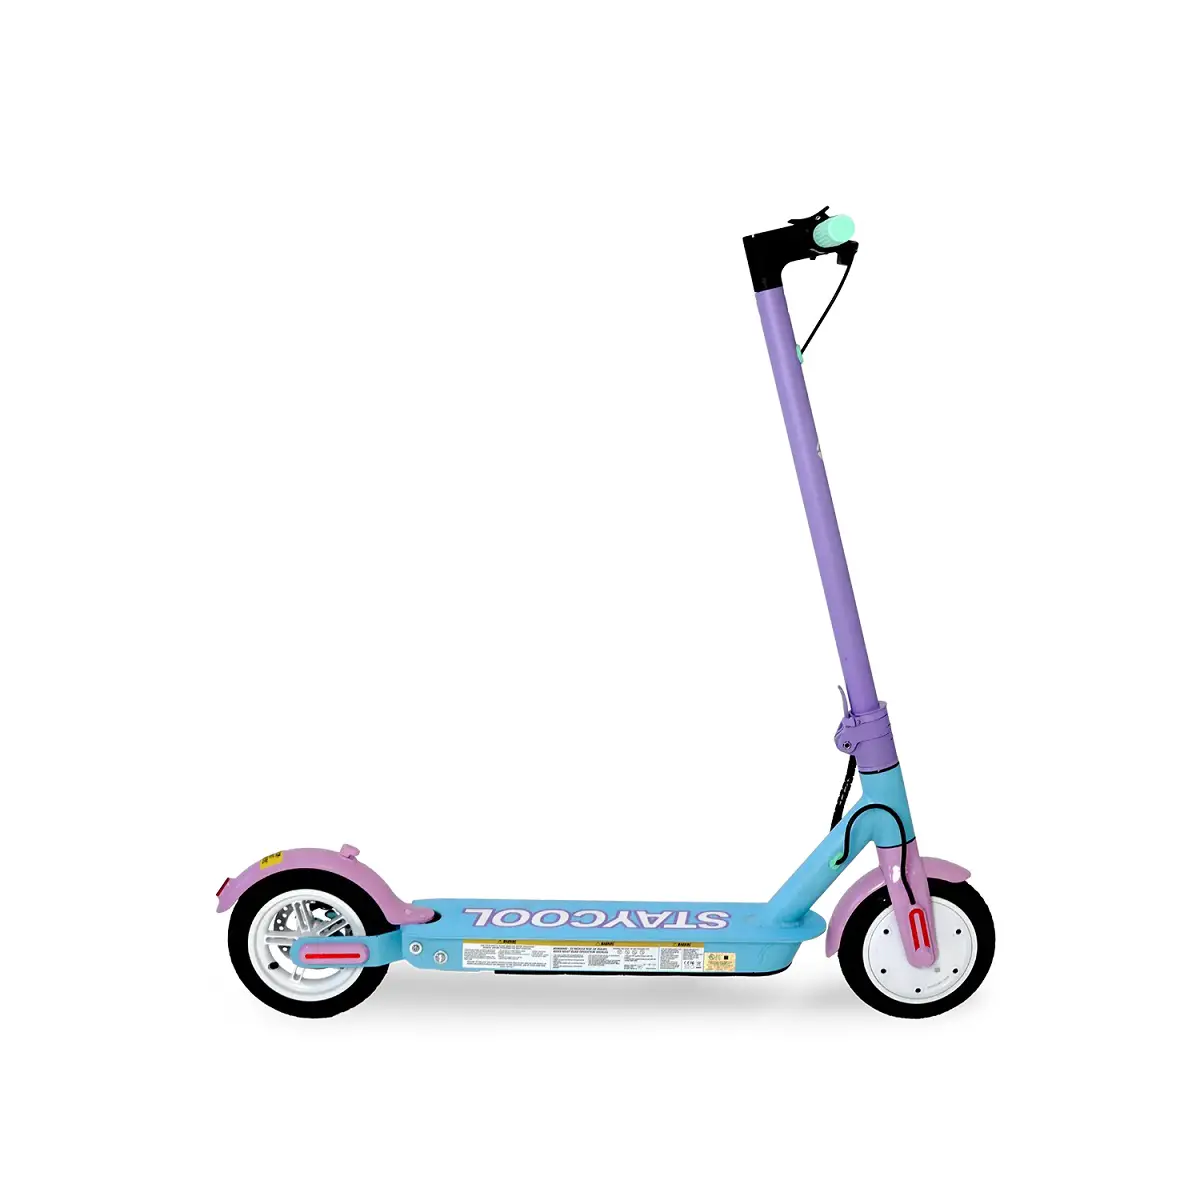 StayCool x SWFT adult ride-on toys